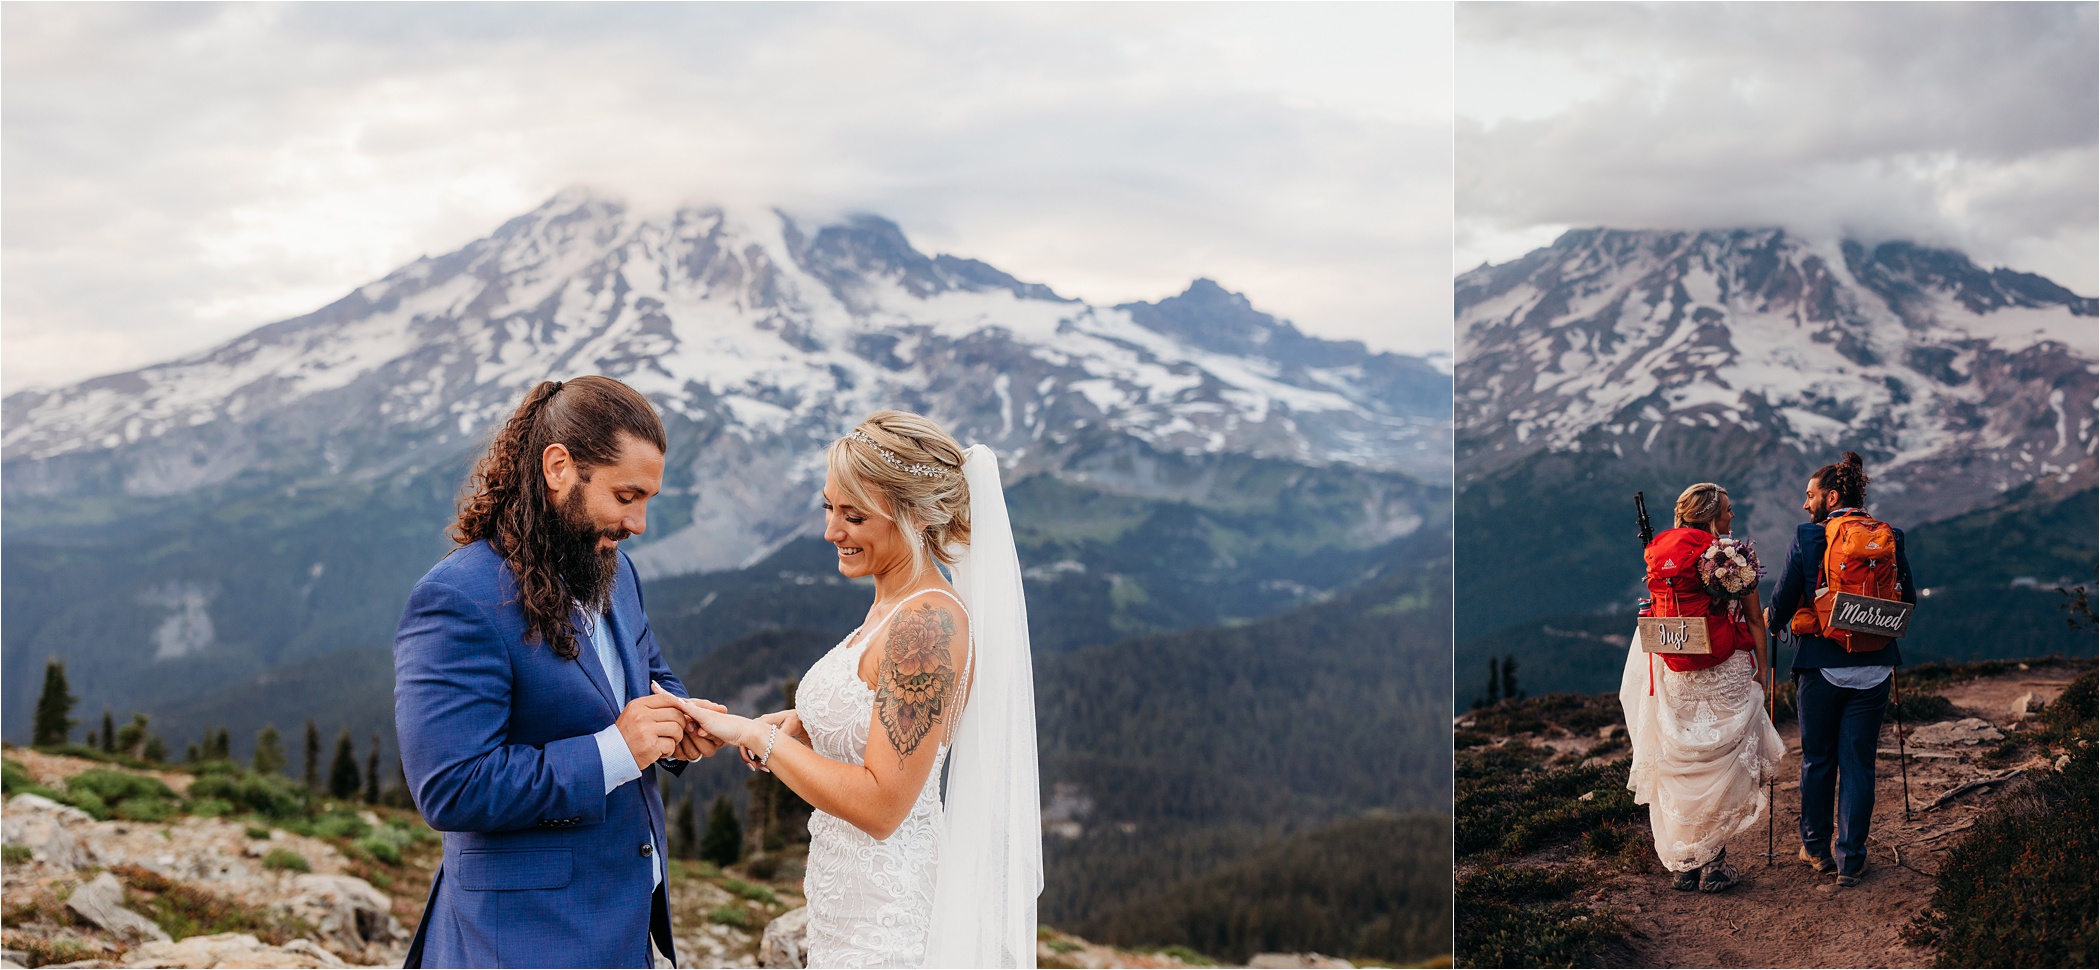 A couple saying their vows in front of Mount Rainier